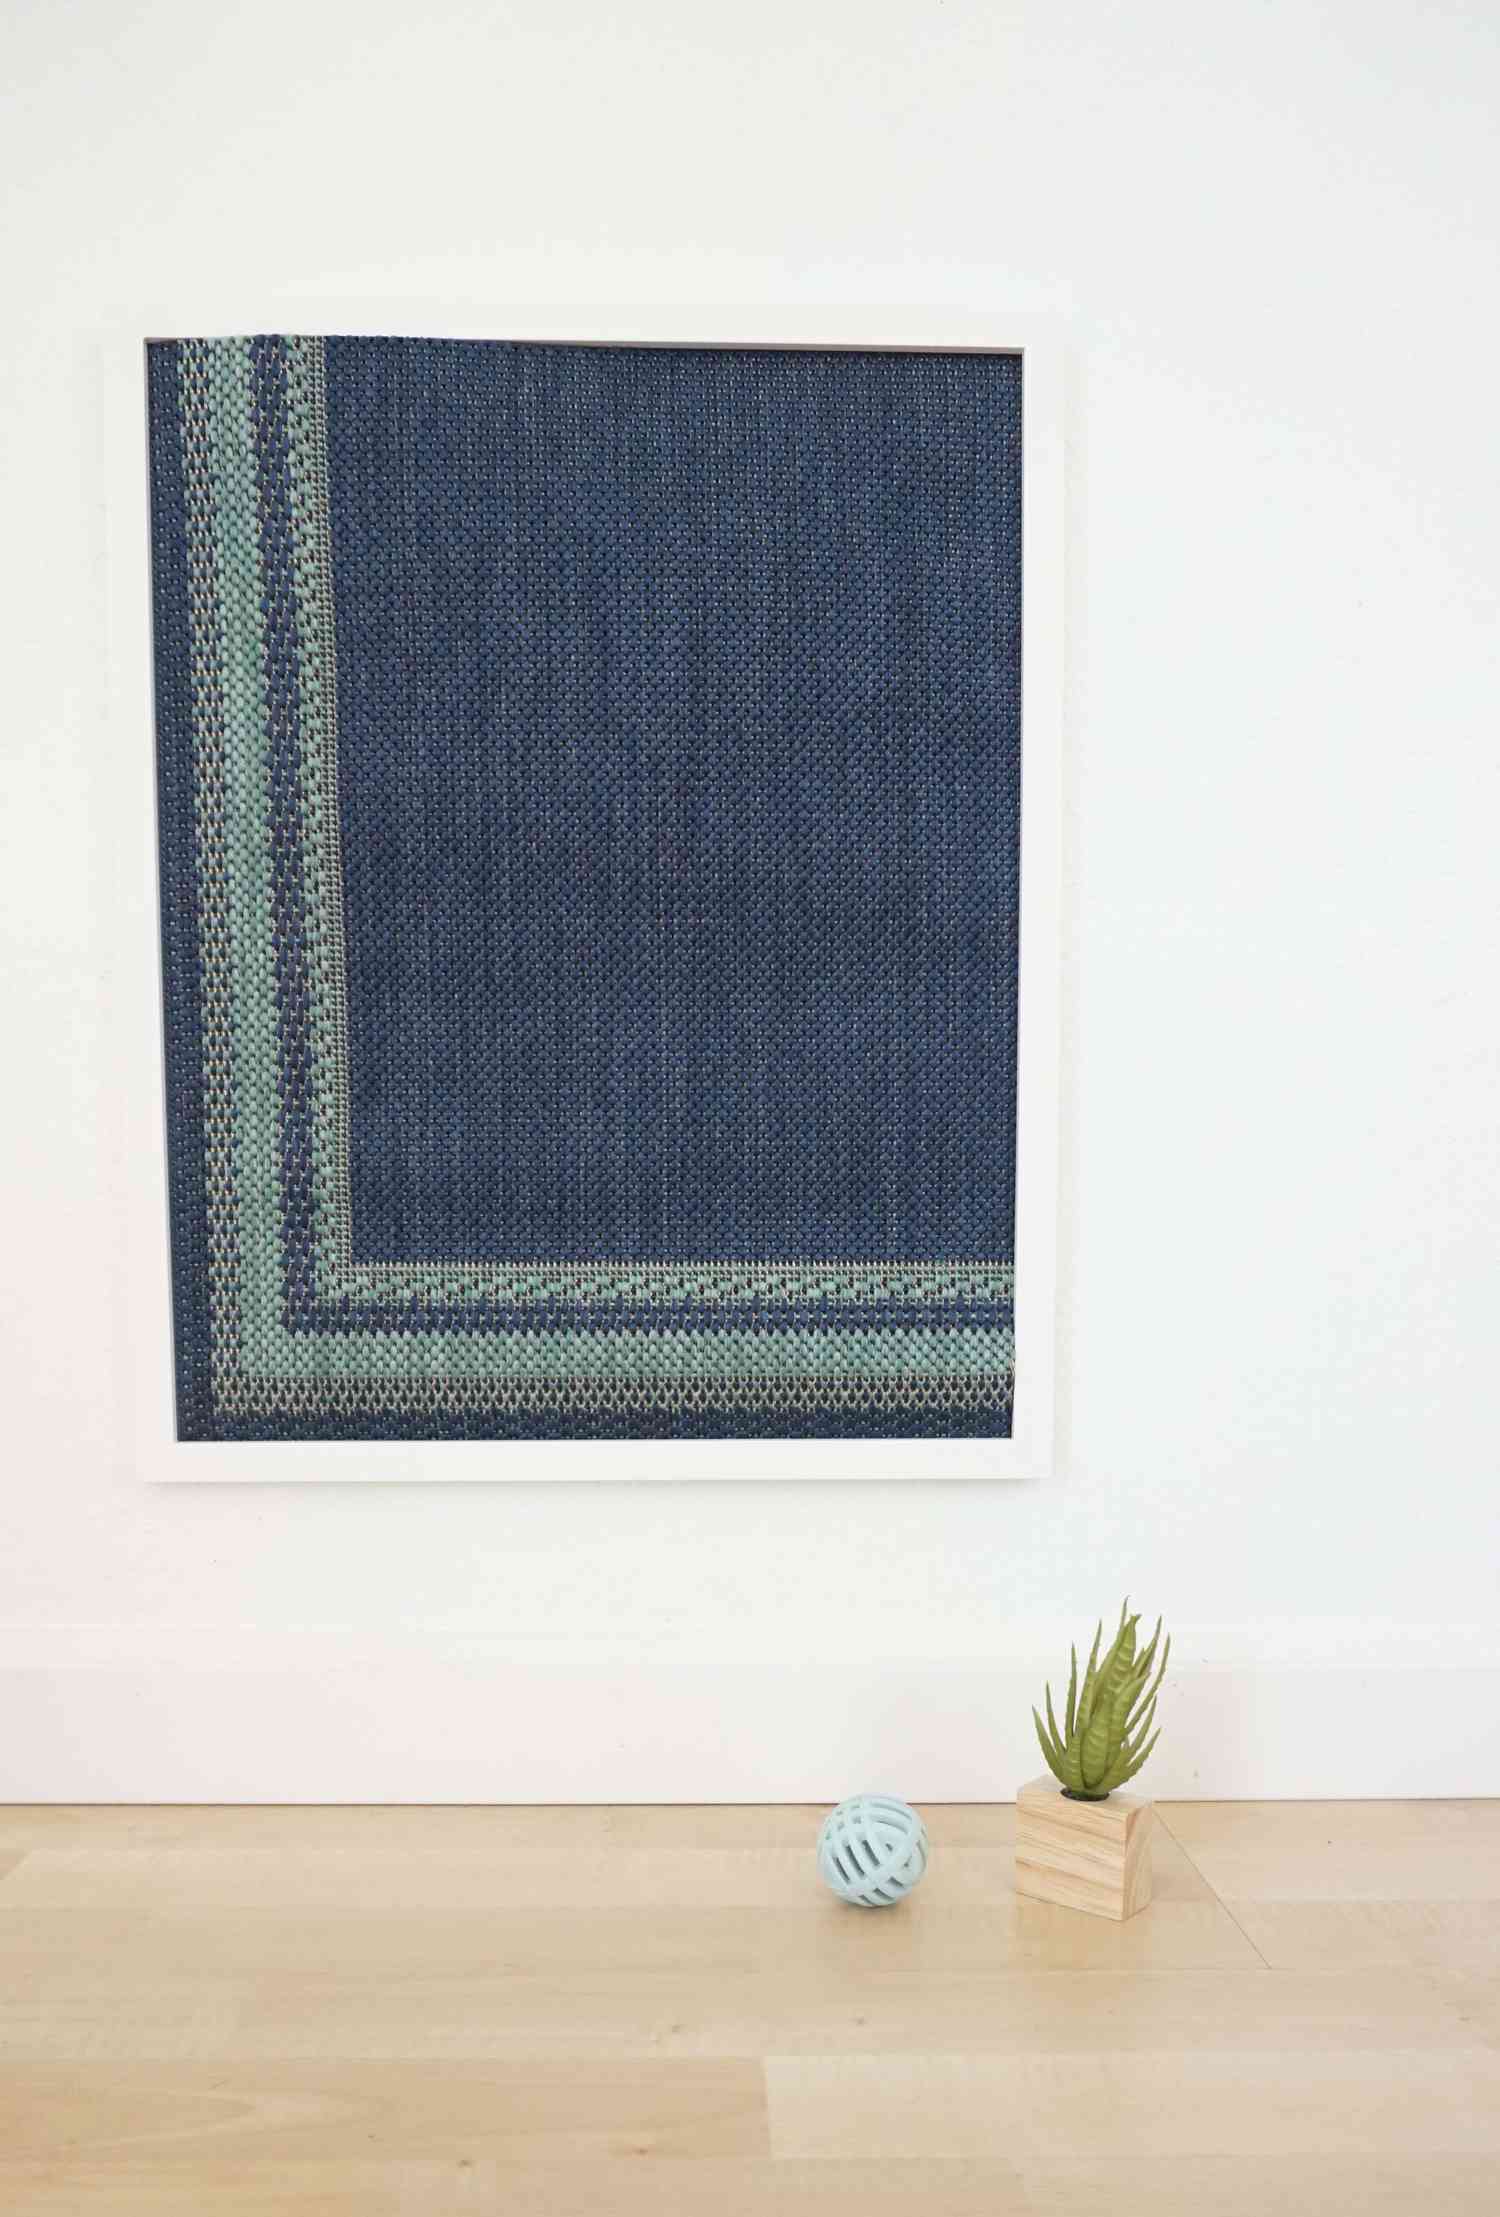 A blue framed rug with a tiny plant and cat toy.